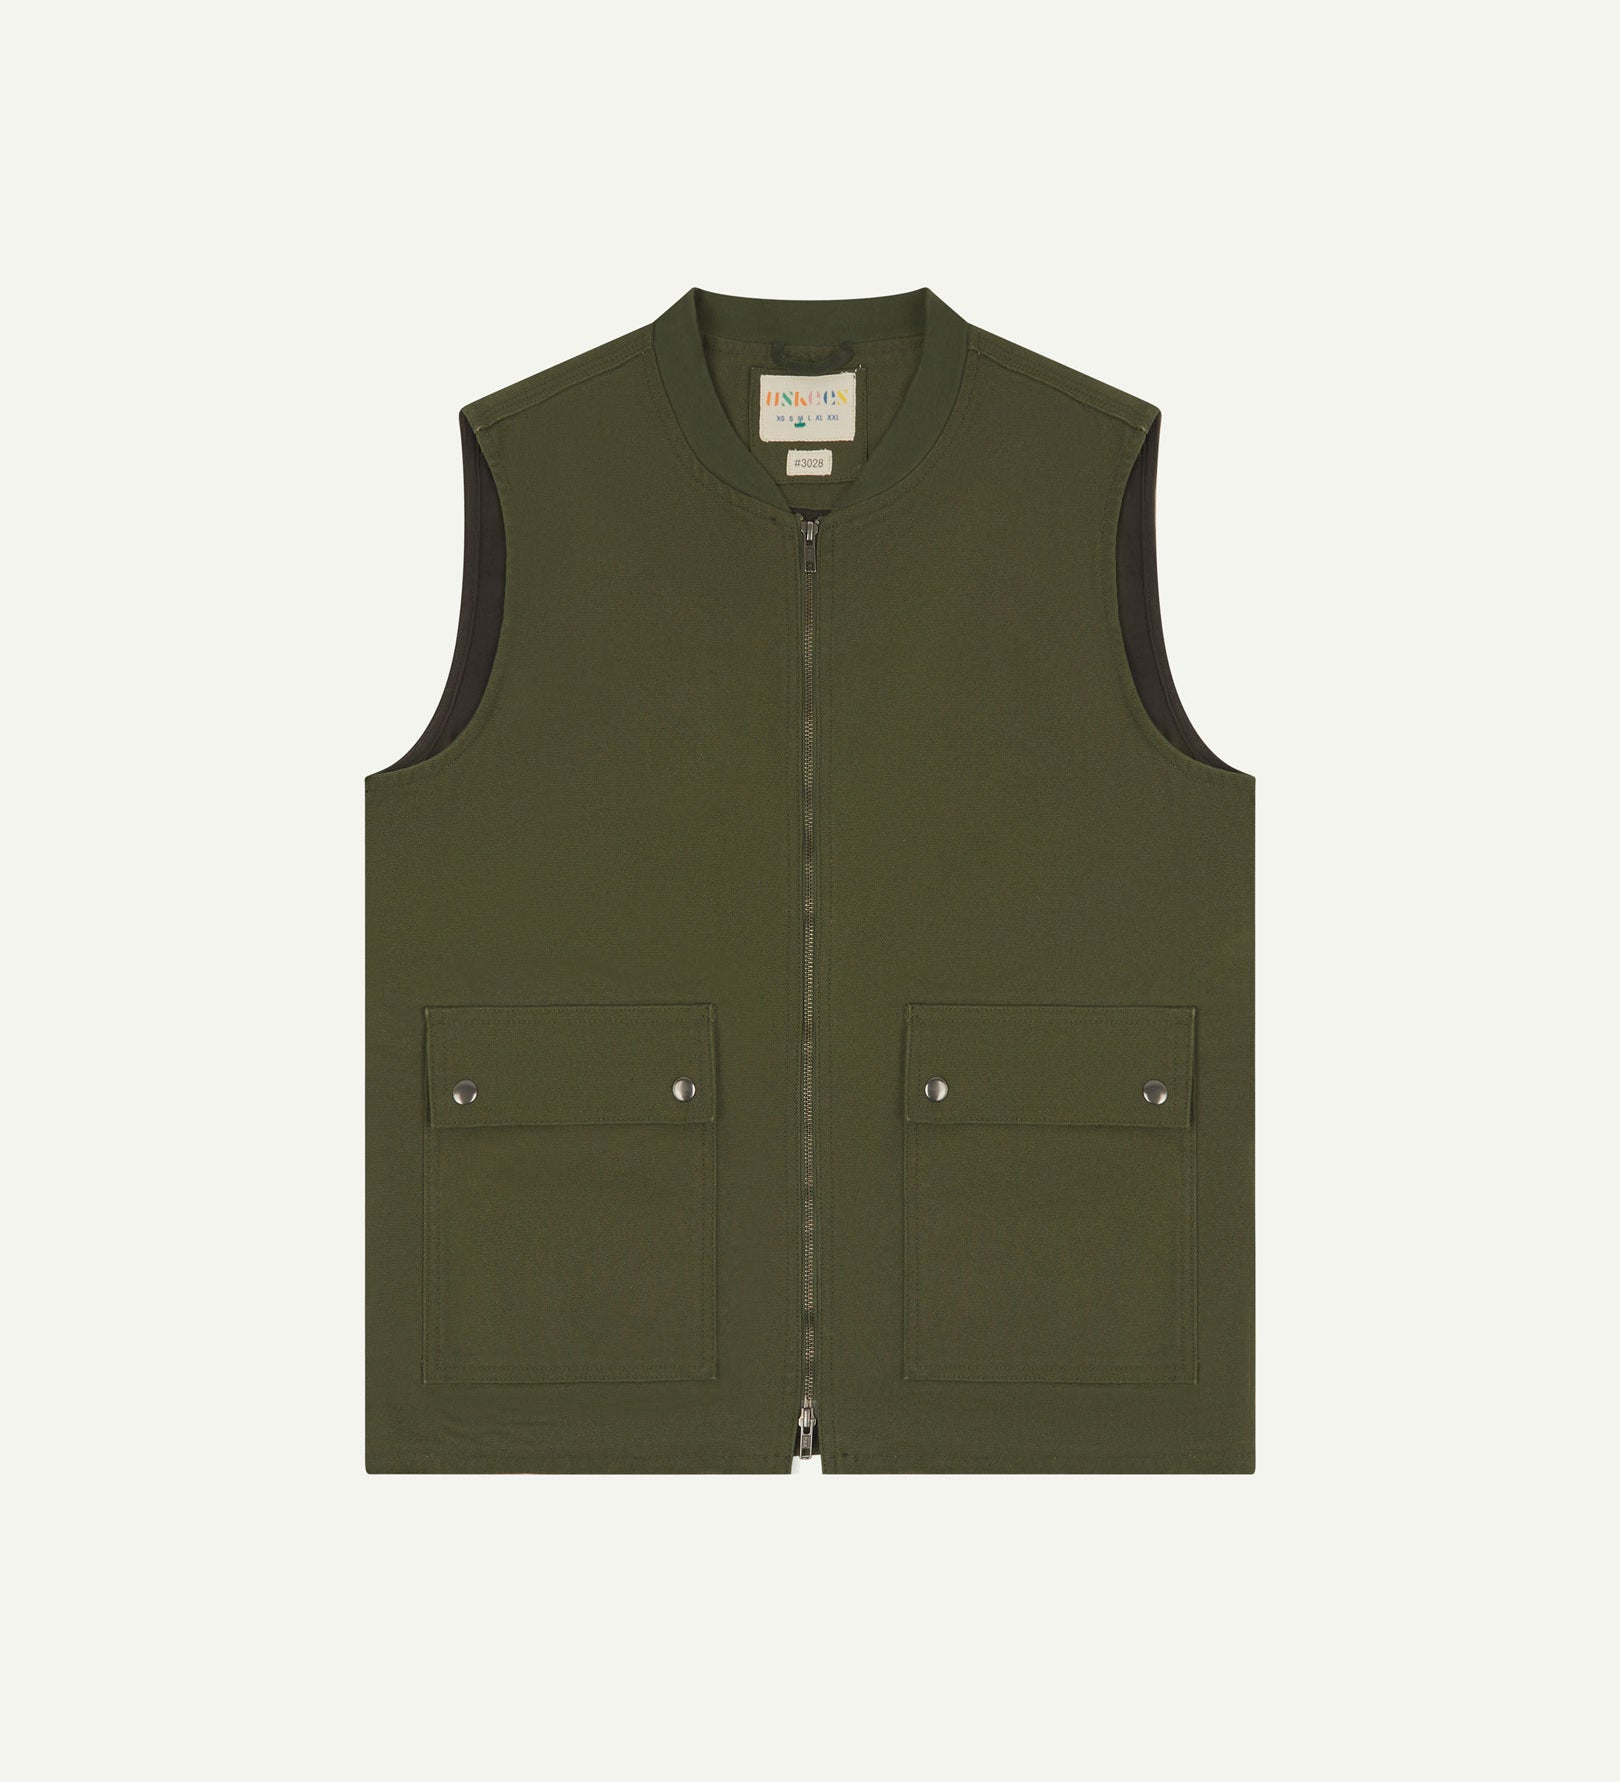 Front flat shot of Uskees coriander-green gilet-type zip front waistcoat showing the front flap pockets and inner brand label at neck.